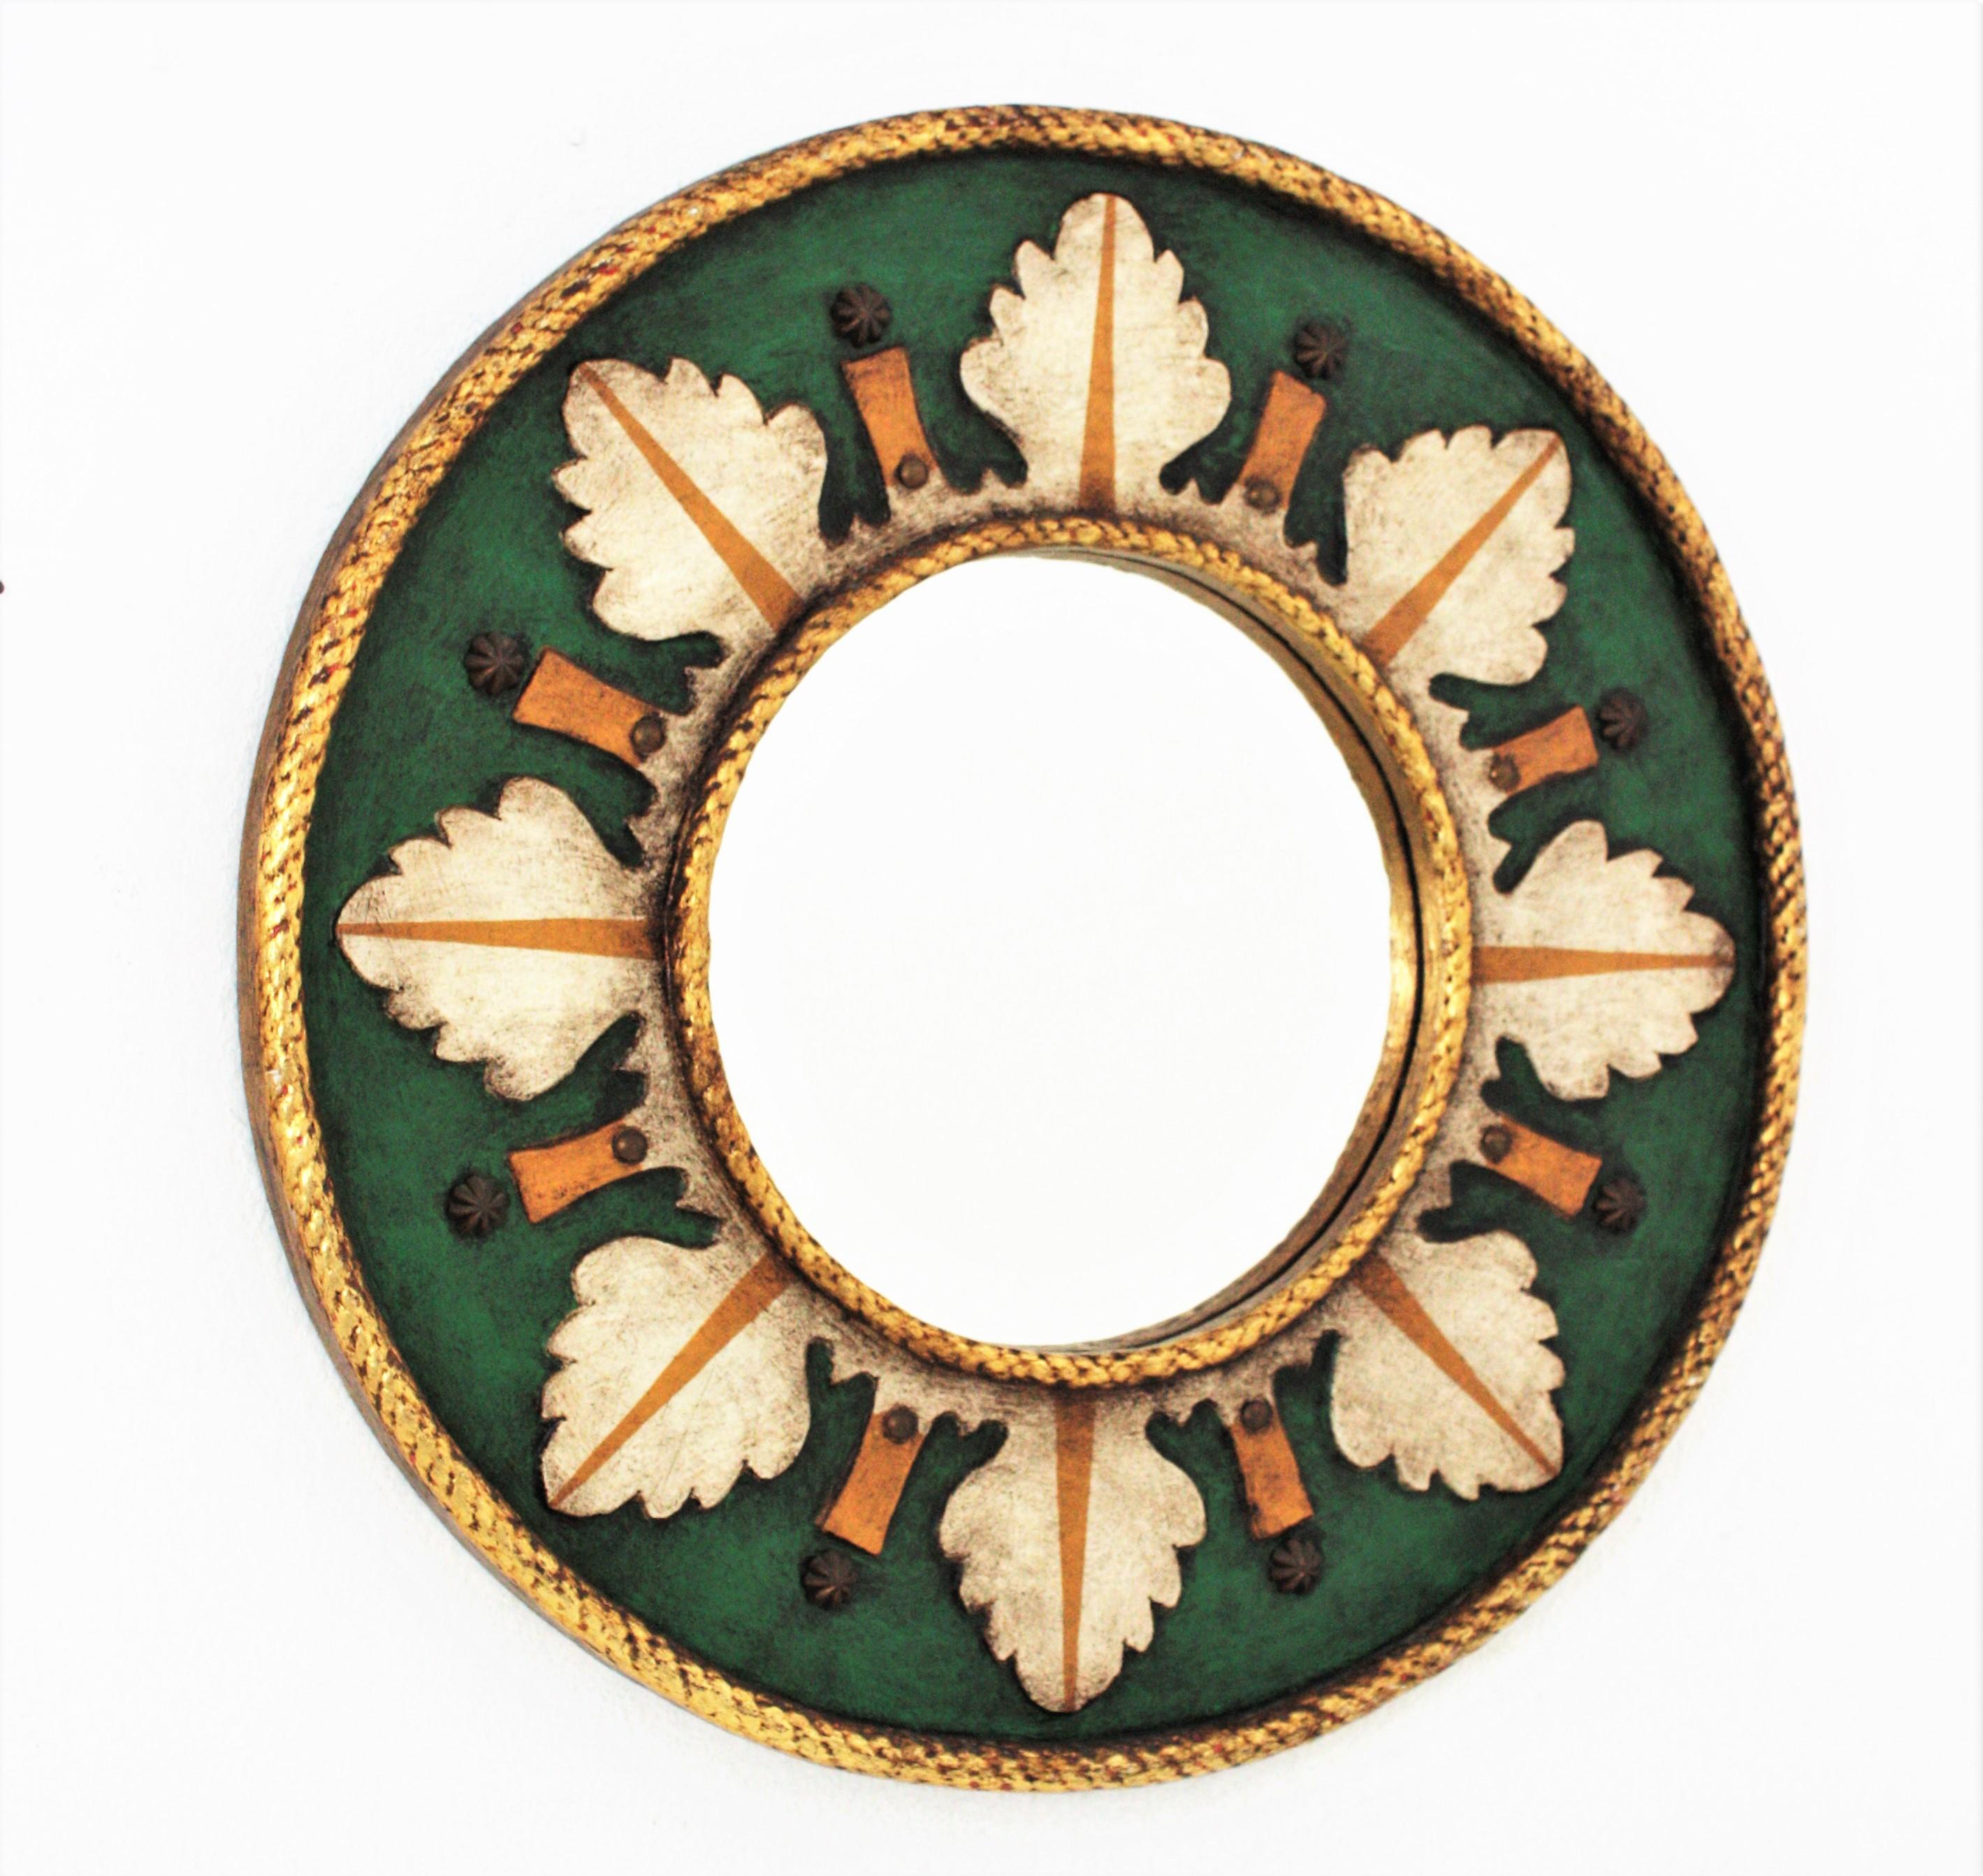 Eye-catching polychrome sunburst mirror Renaissance Inspired, Spain, 1960s.
Beautiful round mirror with nice foliage decorations in sunburst disposition in green, beige and orange colors. A gold leaf  gilded rim surround the glass and the frame at